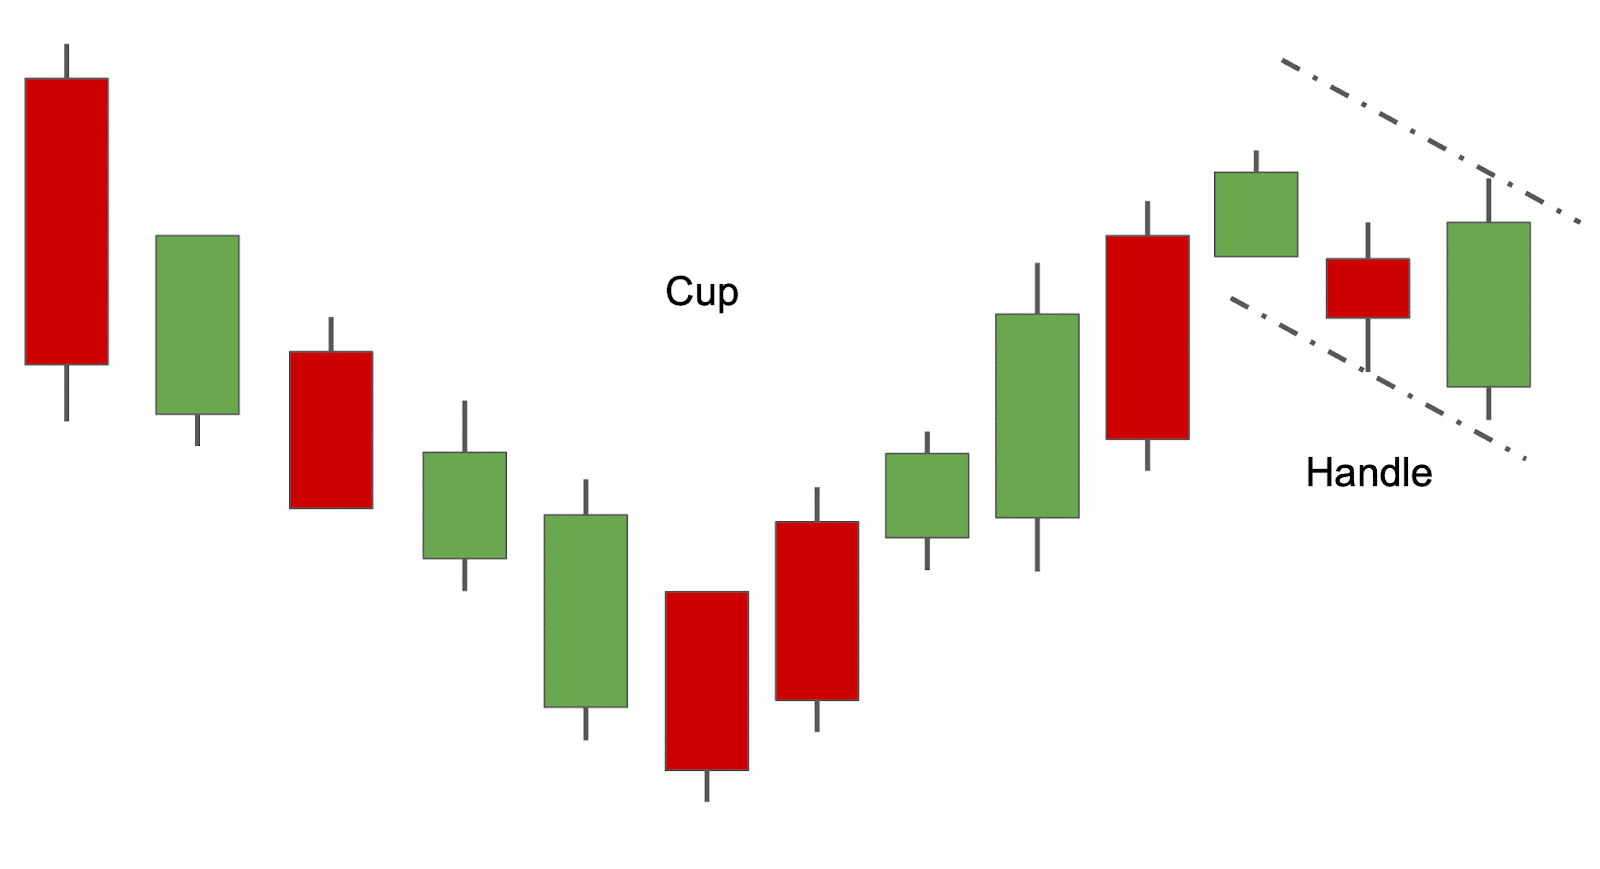 The cup and handle is a bullish reversal pattern in chart analysis. It is named so because it resembles a cup-and-handle shape when plotted on a graph.